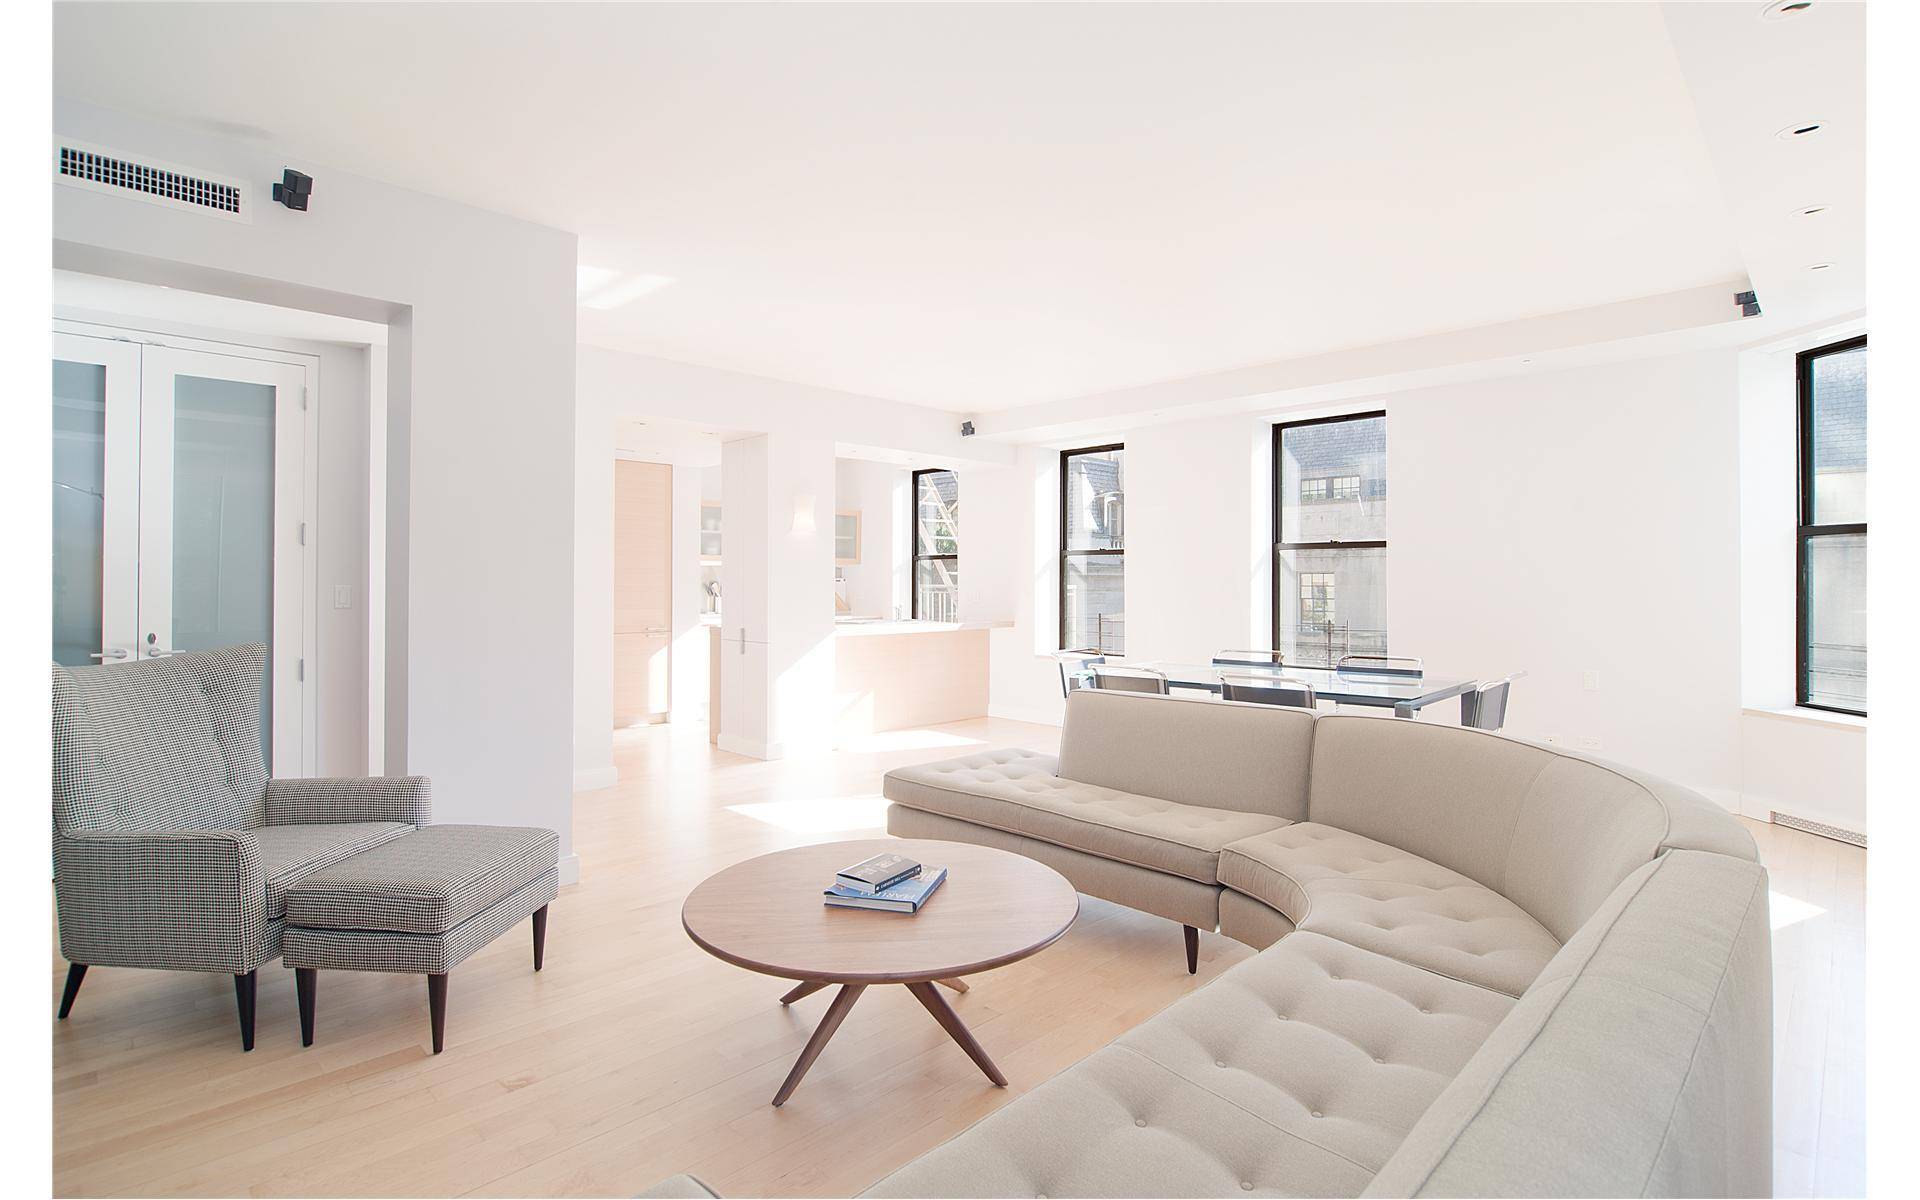 High end renovation in 28 unit building boasts 9'8' ceilings, sweeping exposures south and west thru 2 pane windows.